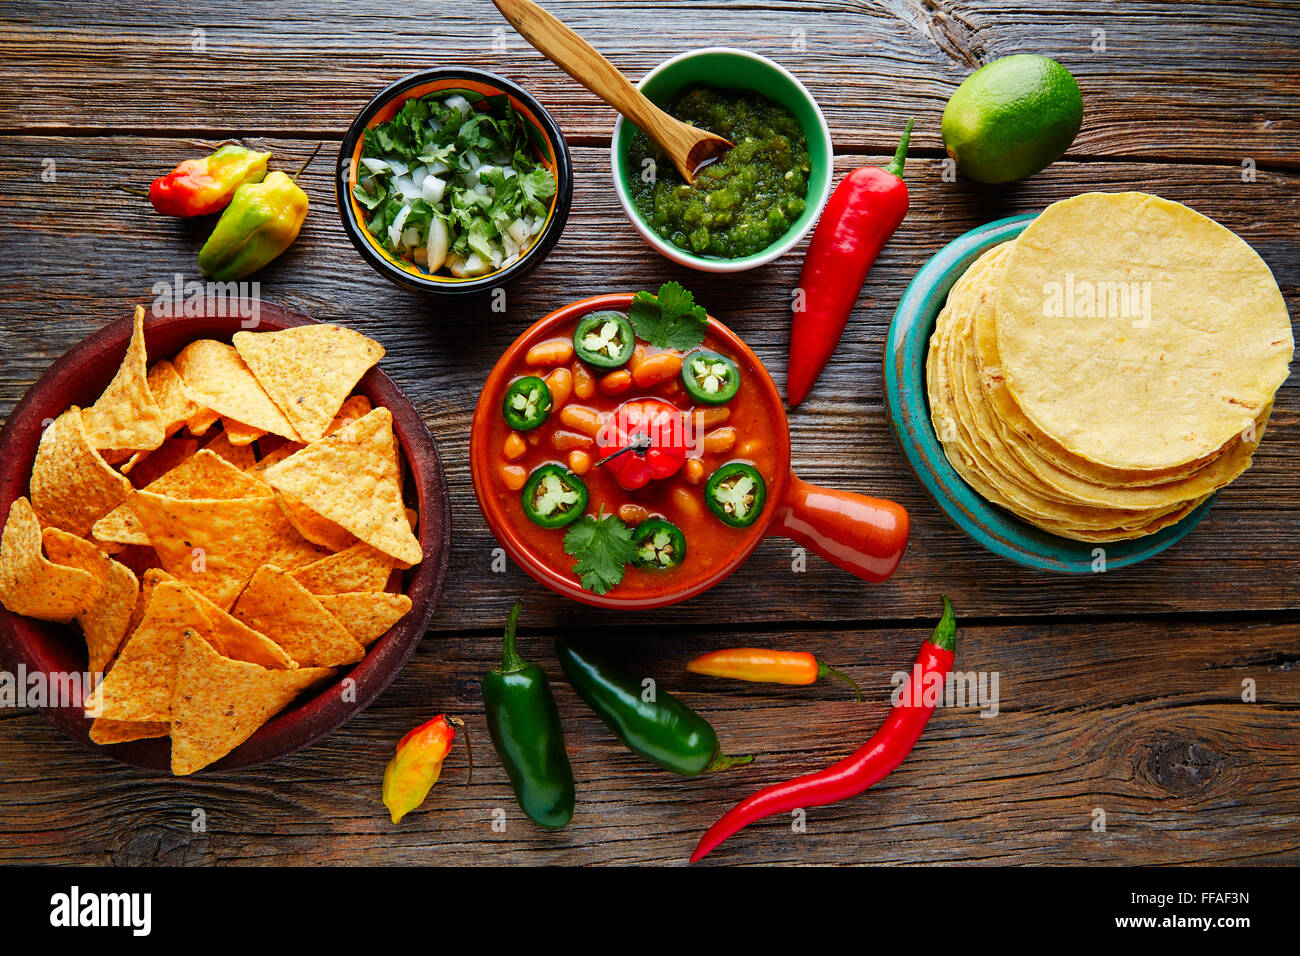 Frijoles charros mexican beans with chili pepper sides and tortillas Stock Photo